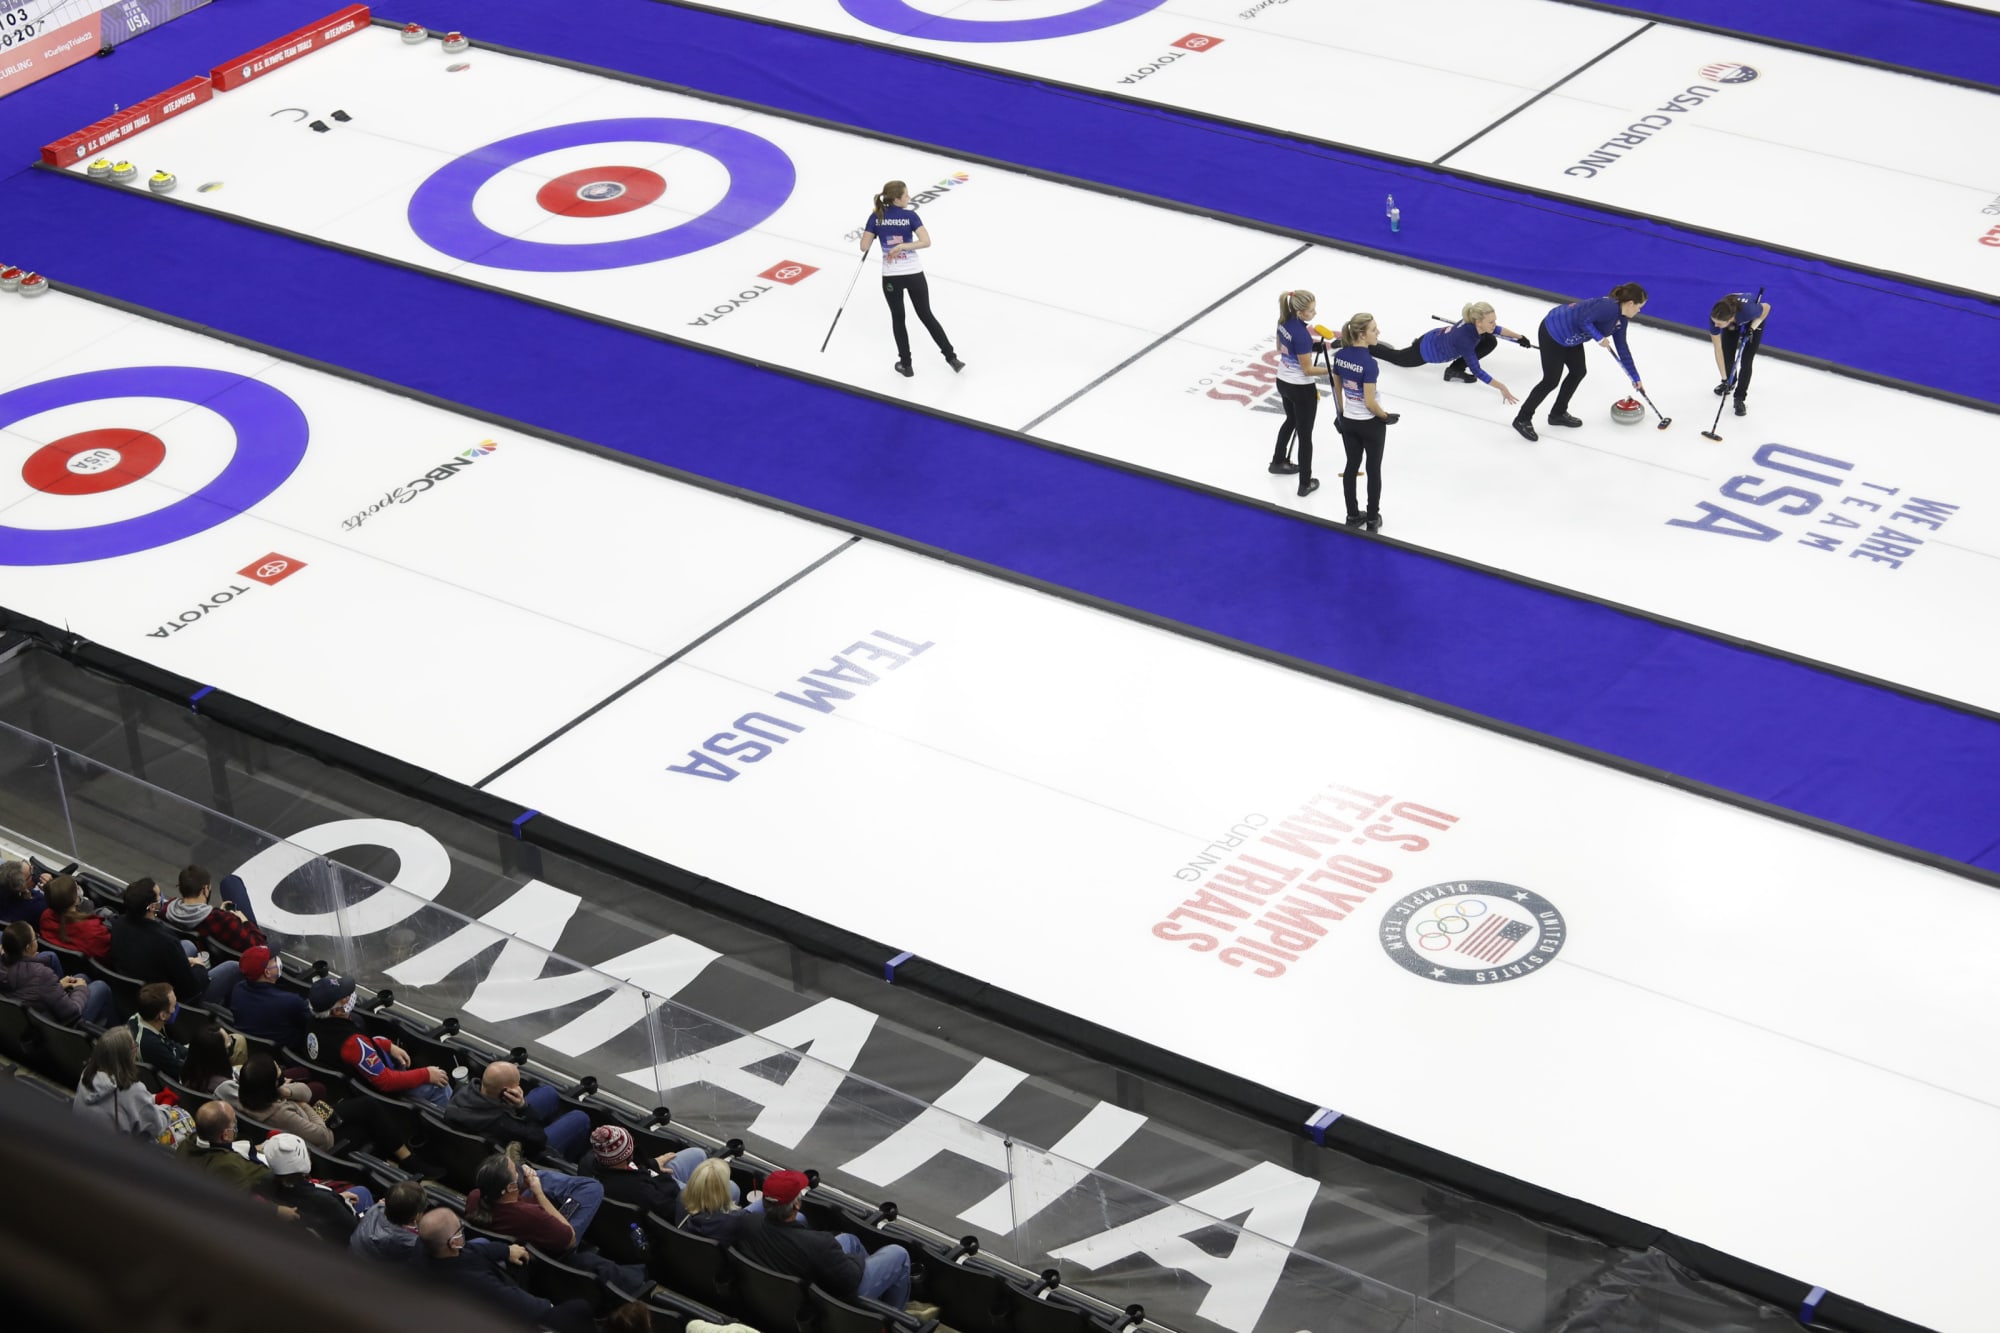 2022 Winter Olympics Curling rules explained